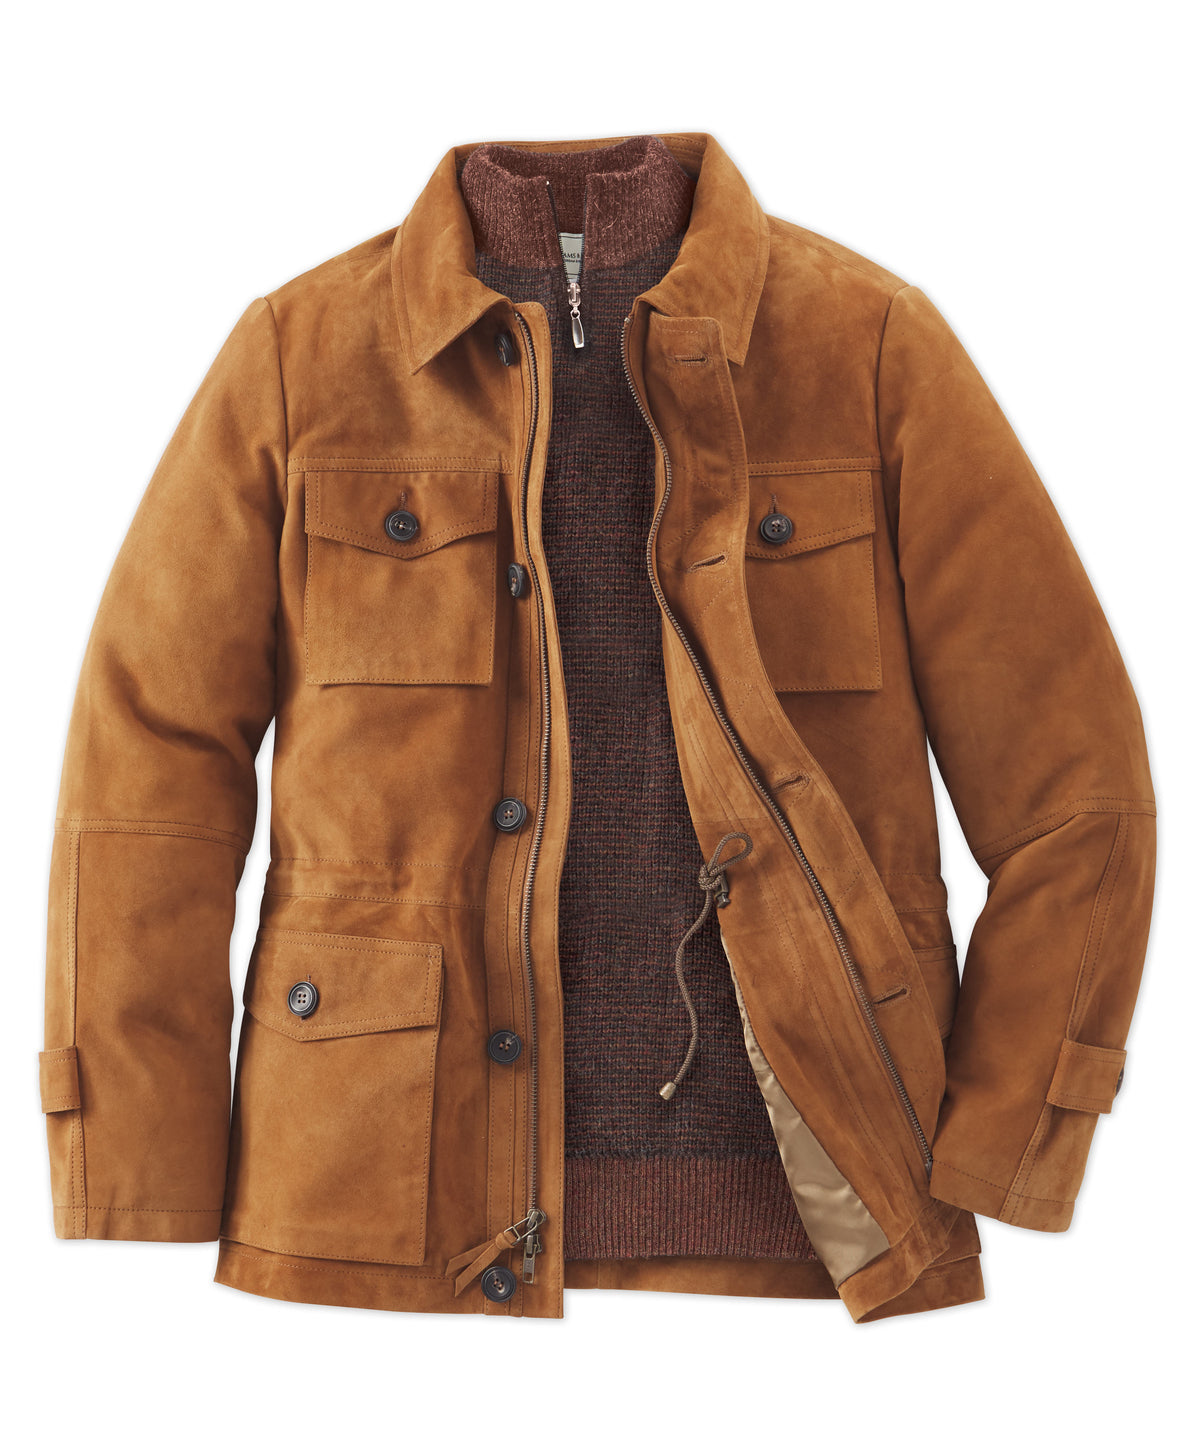 Goat Suede Field Jacket - Cocoa